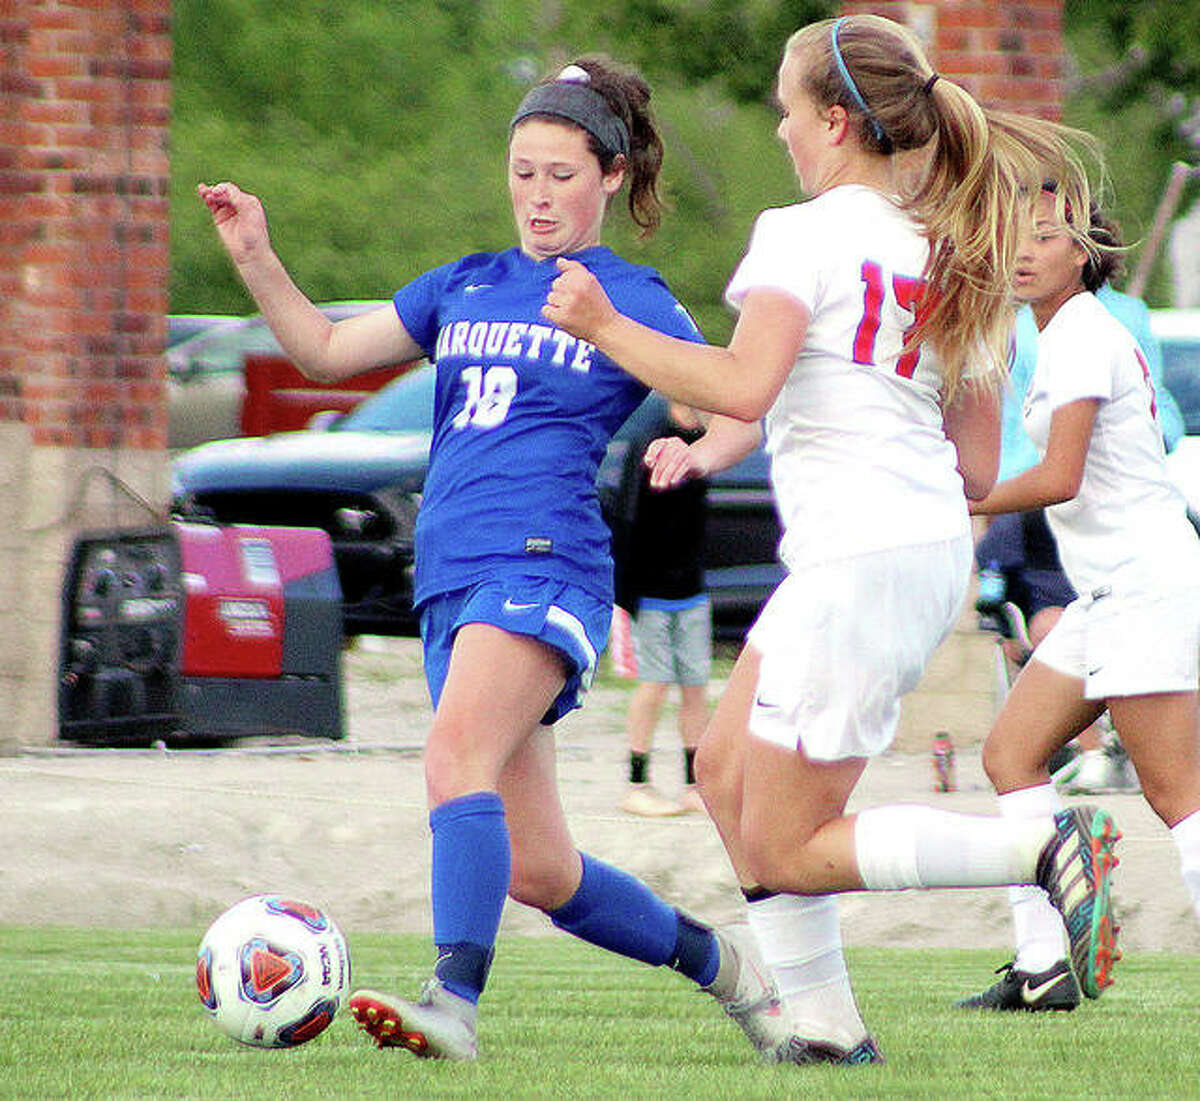 Senior Madelyn Smith of Marquette (18) will be one of the Explorers leaders this season, according to coach Brian Hoener. A Saint Louis University recruit, Smith scored nine goals and had seven assists as a sophomore. She is shown in action against Roxana in the 2019 Class 1A regional at Gordon More Park.